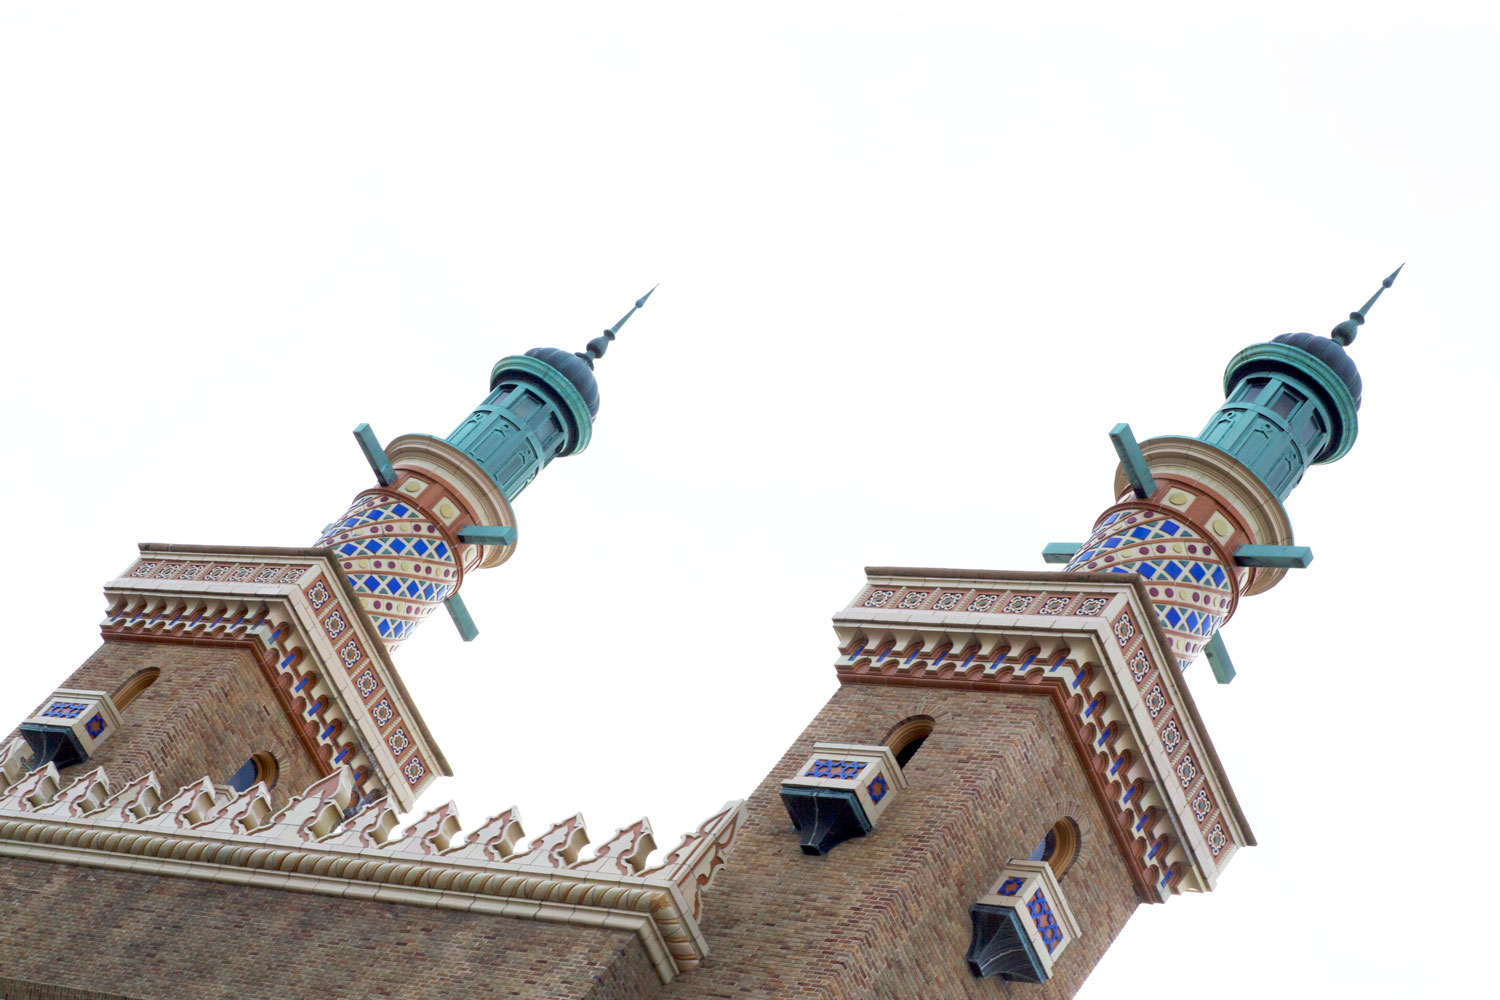 Detail view of the faux minarets of the front facade